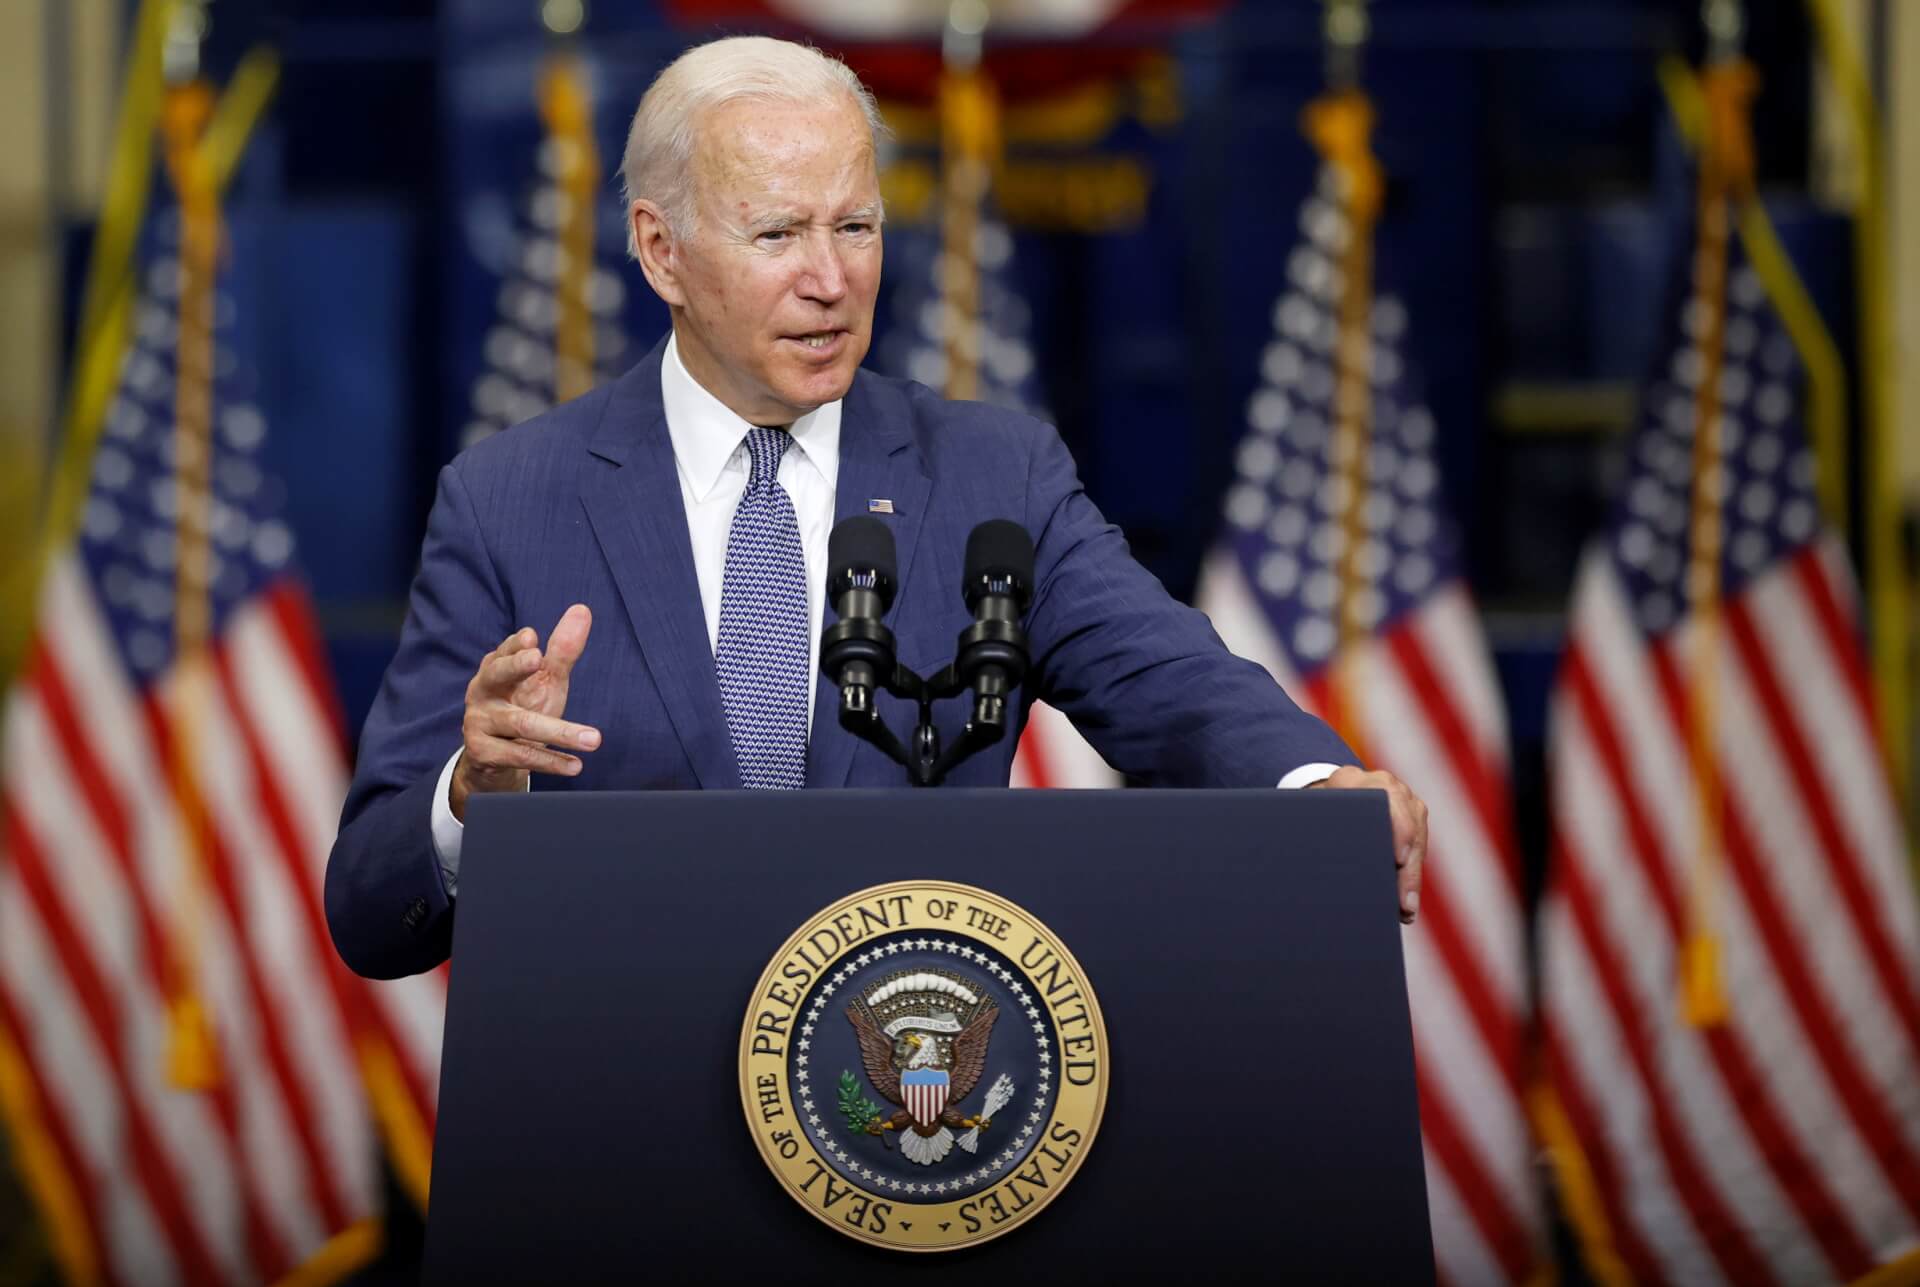 Days Before COP26, Biden Announces $555bn Climate Investment as Part of $1.75tn budget